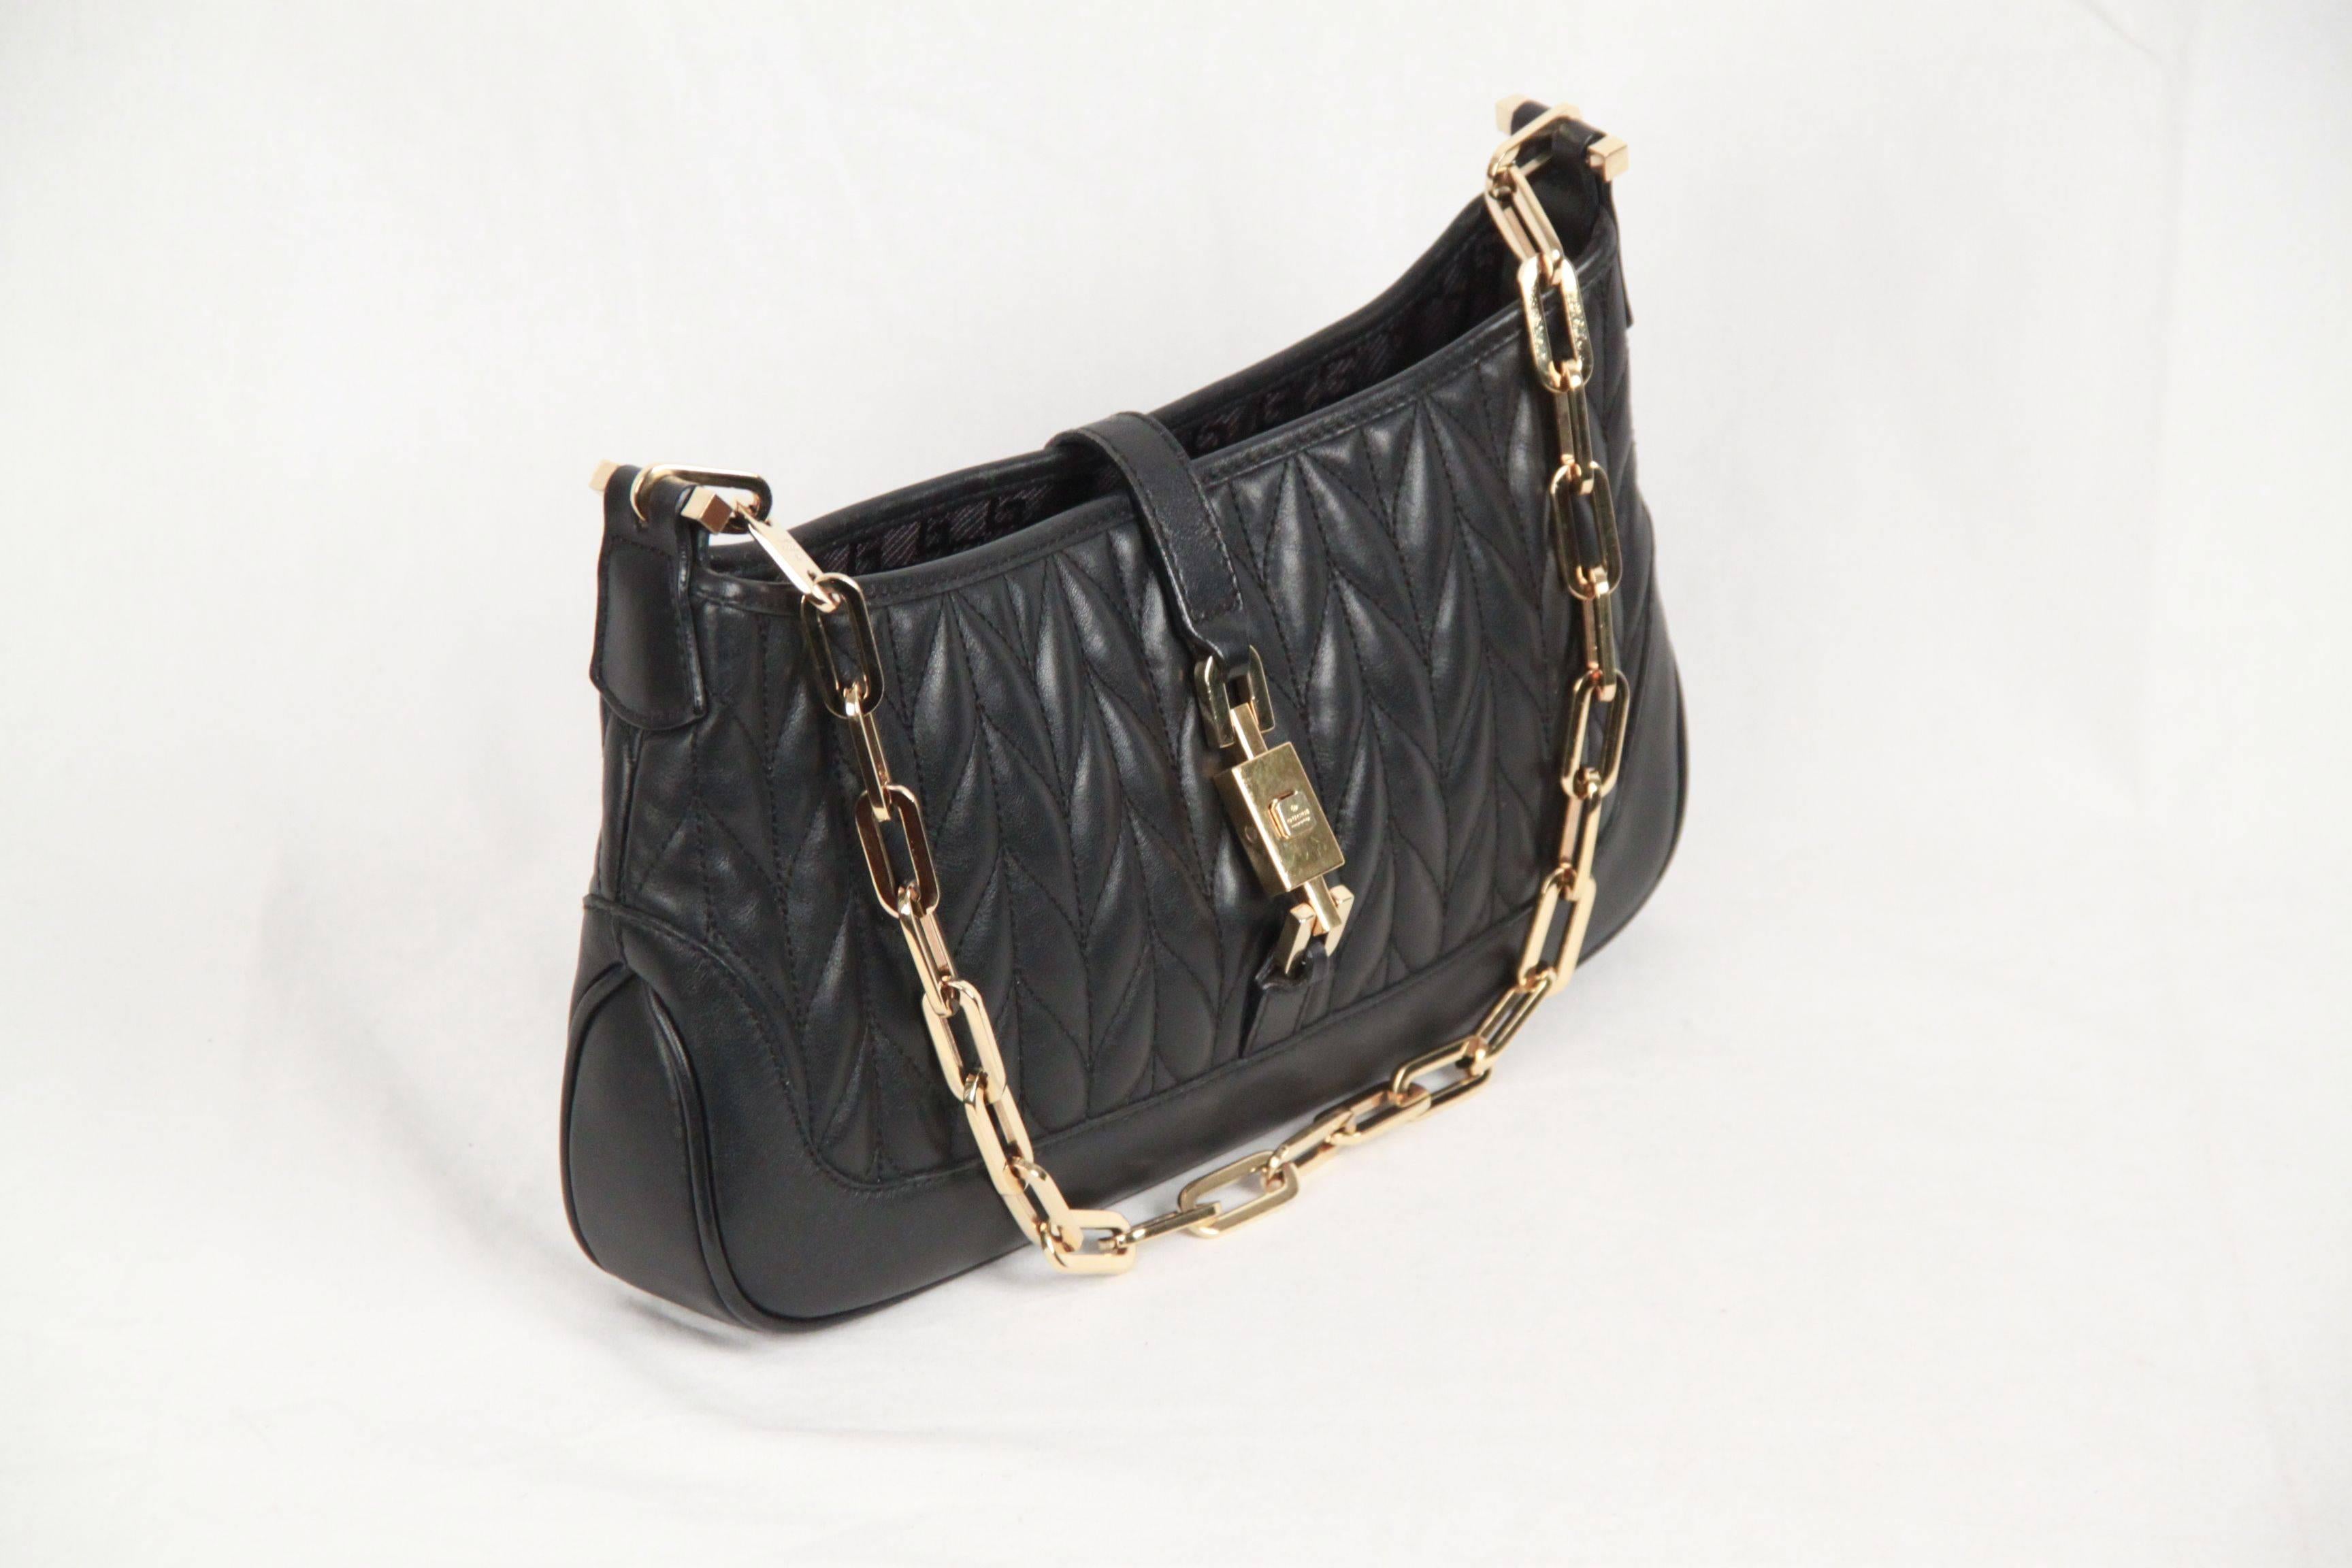 GUCCI Black Quilted Leather JACKIE SHOULDER BAG w/ Chain Strap In Excellent Condition In Rome, Rome